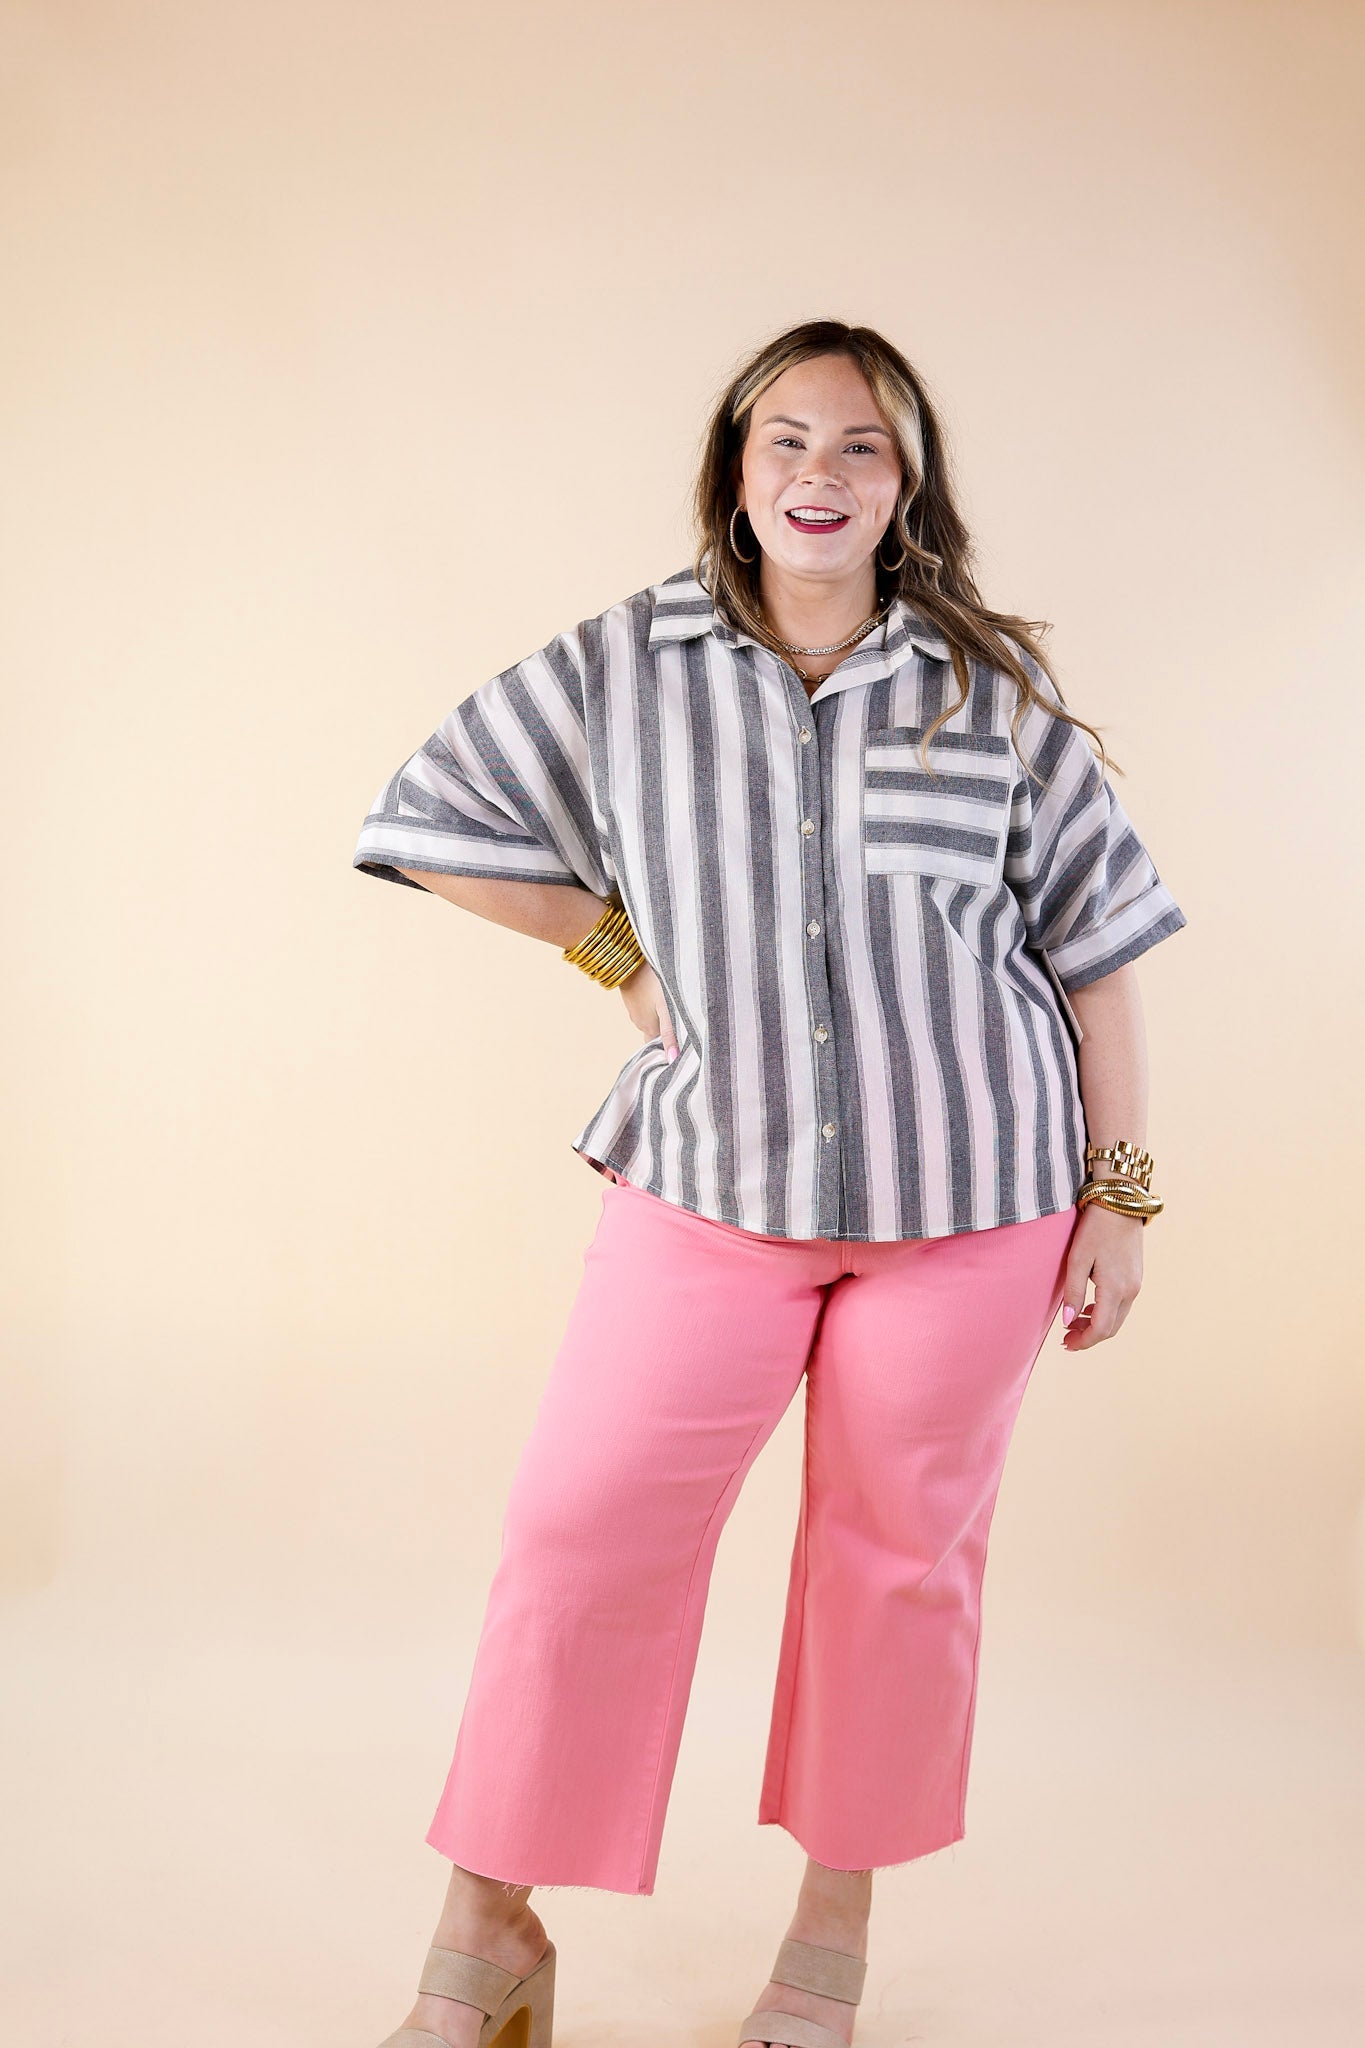 Down The Beach Button Up Striped Top in Ivory and Grey - Giddy Up Glamour Boutique